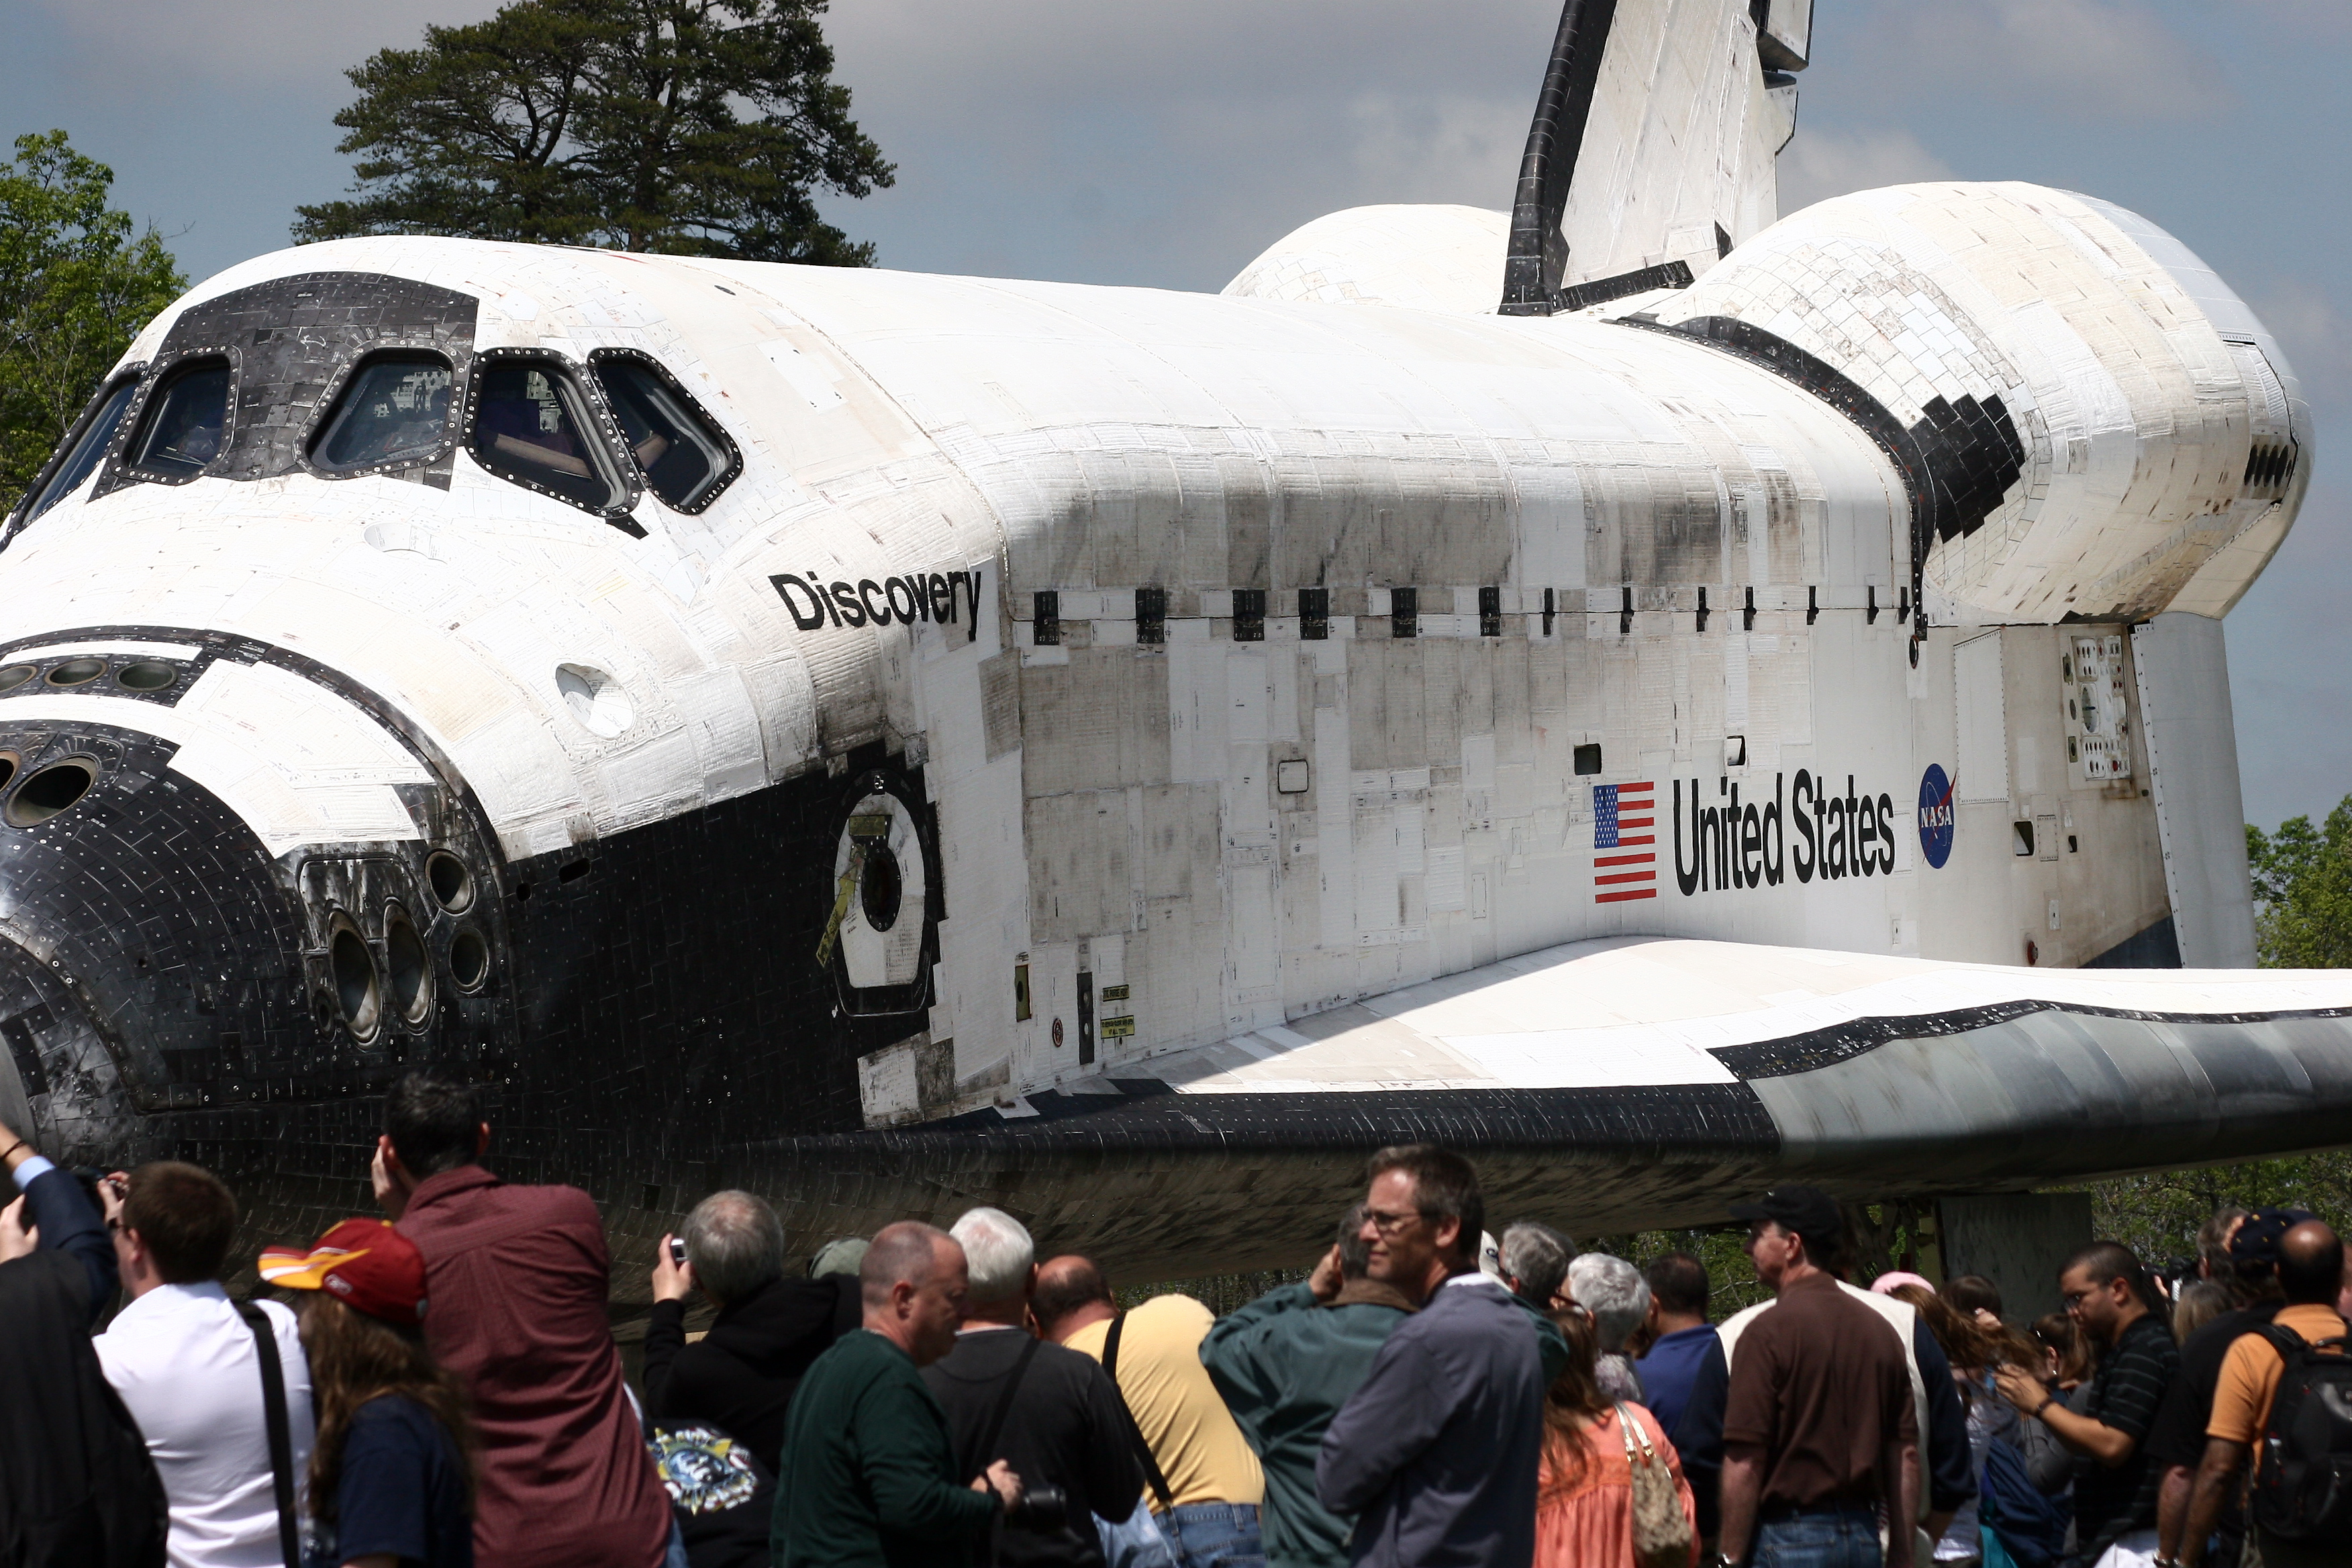 Sadness, frustration, and ultimately admiration surround space shuttle Discovery's welcome to ...